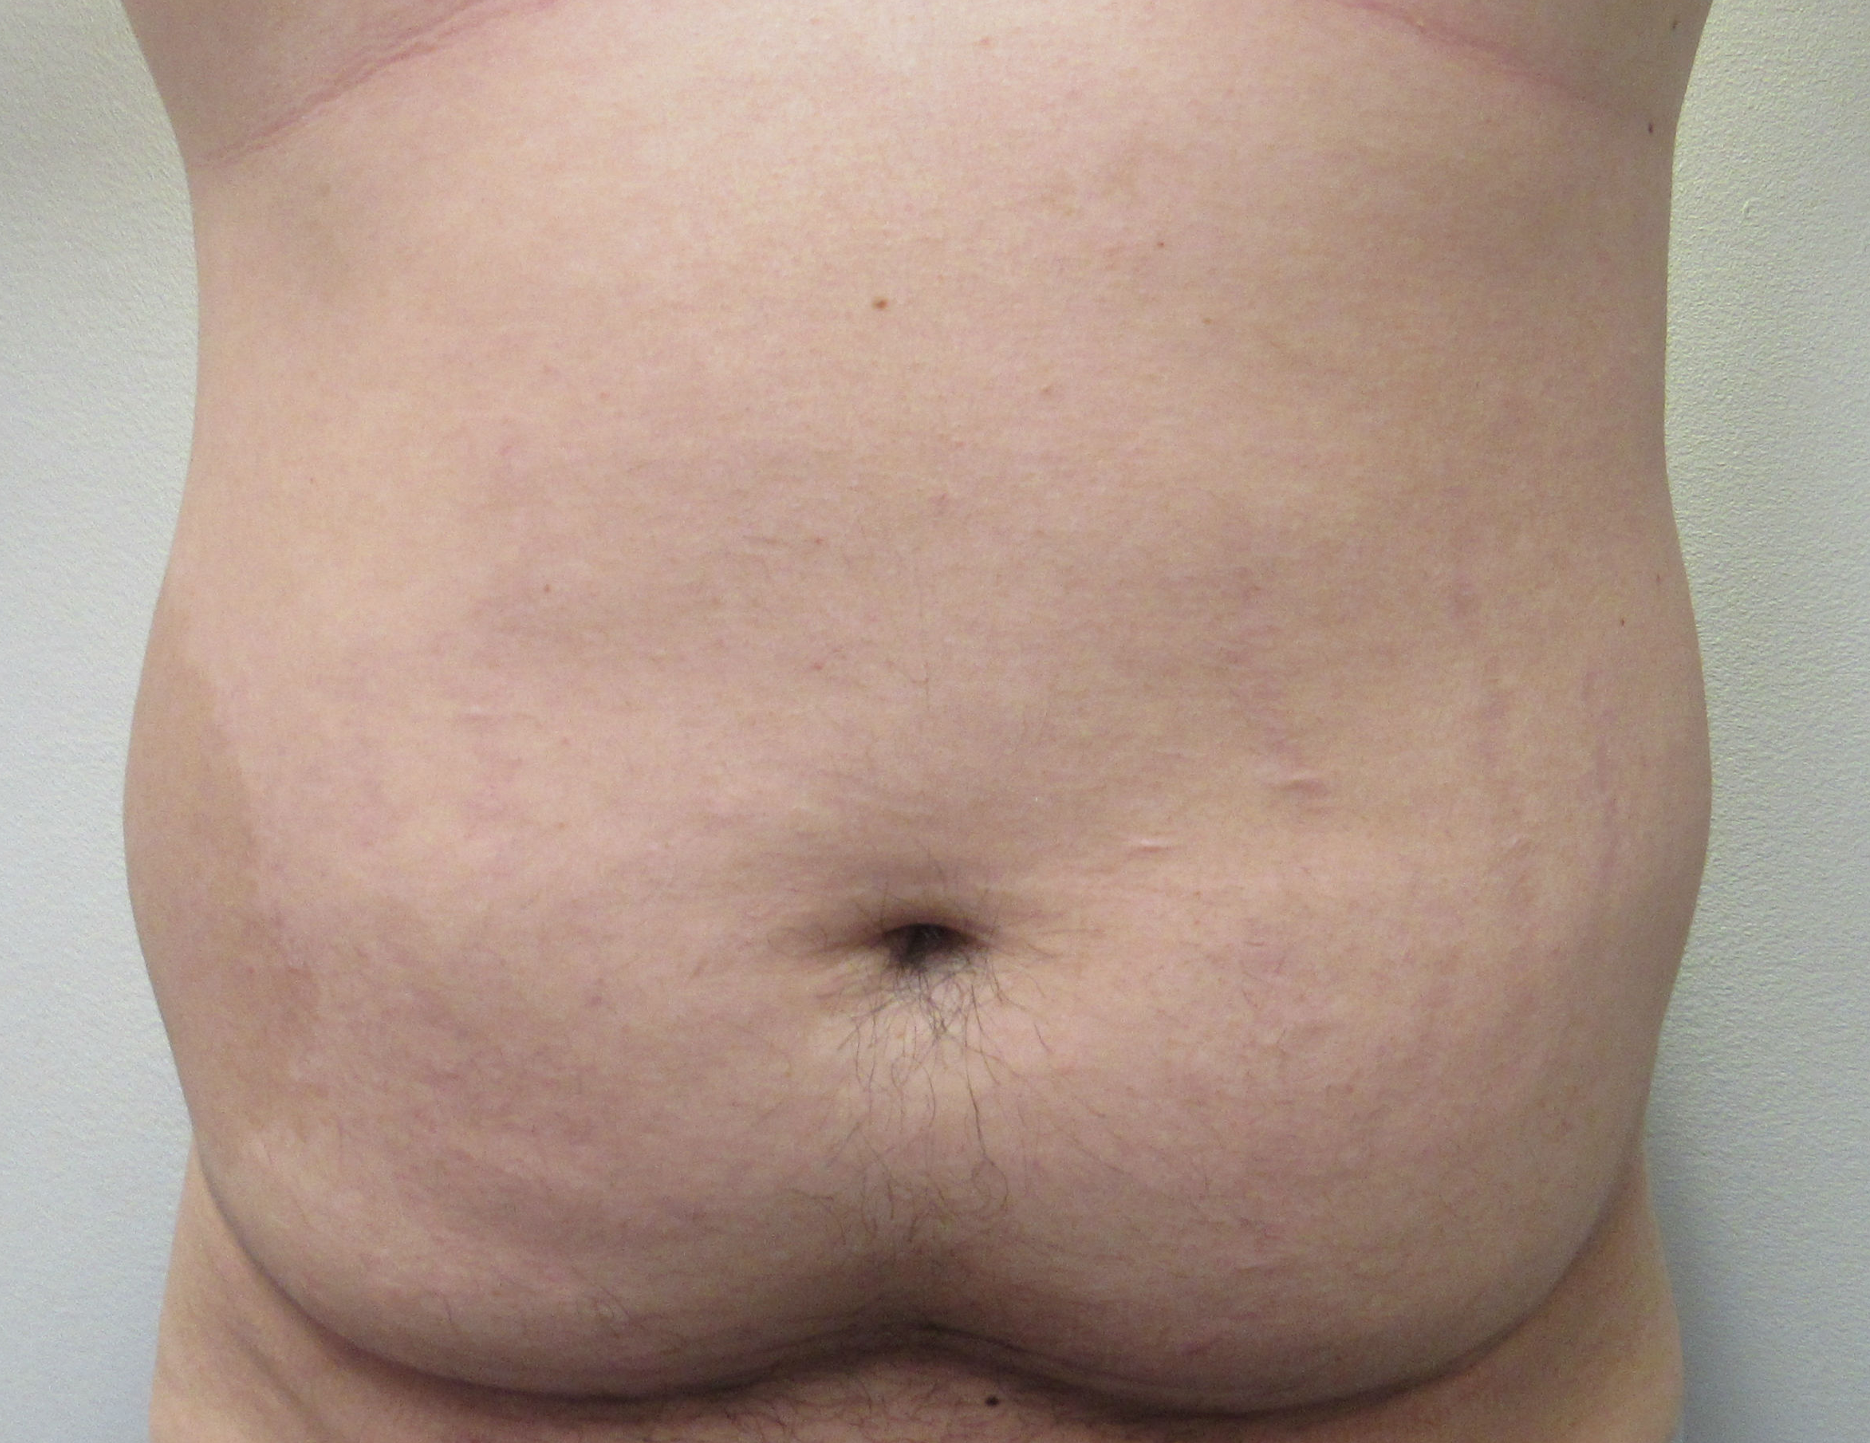 Male Liposuction before and after photos by Hughes Plastic Surgery in Los Angeles, CA